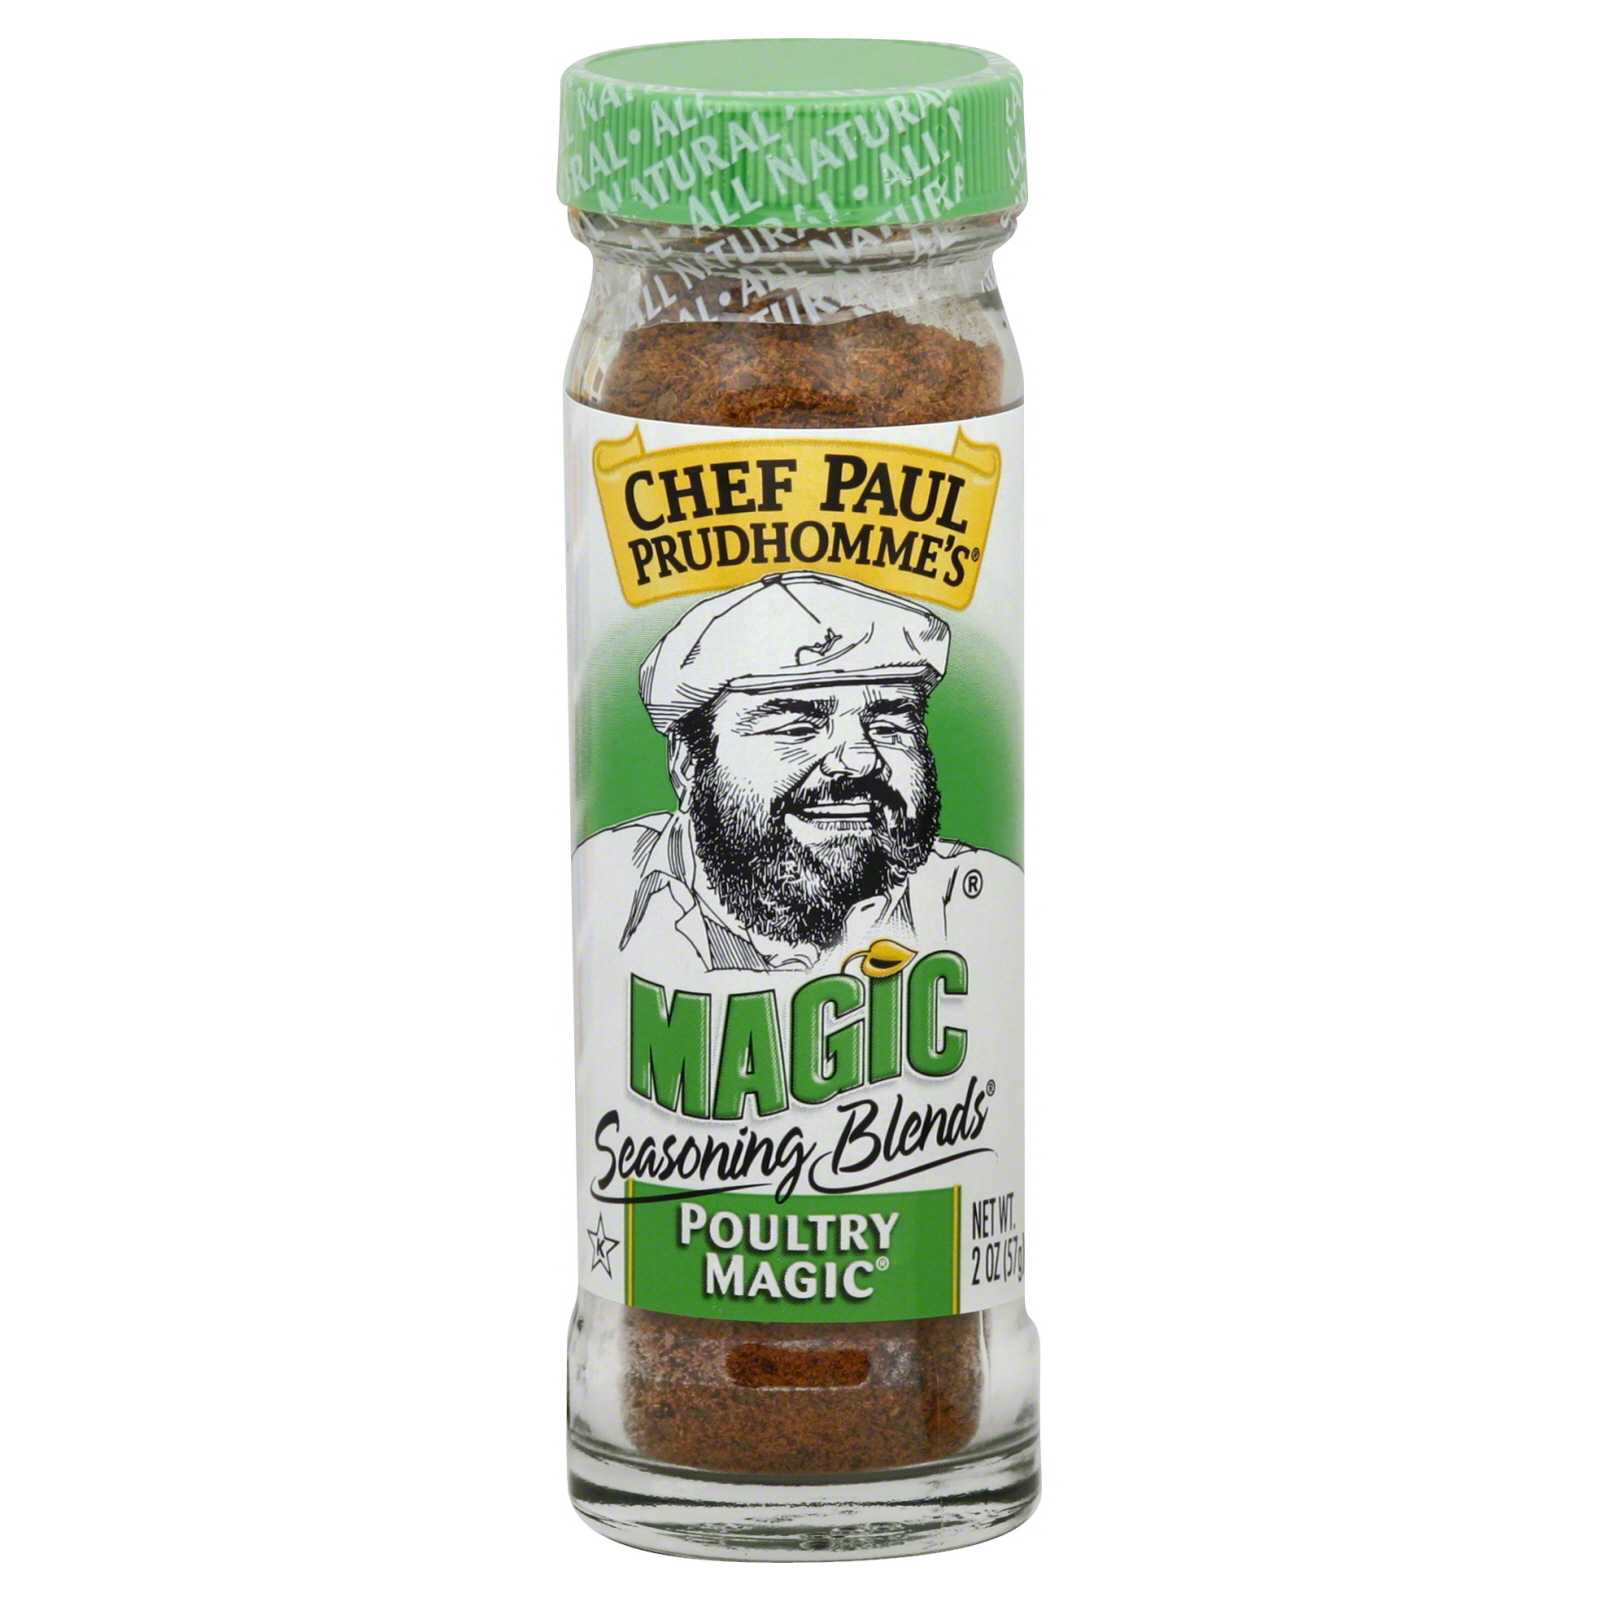 Chef Paul Prudhomme's Magic Seasoning Blends, Poultry Magic, 2 oz (57 g)